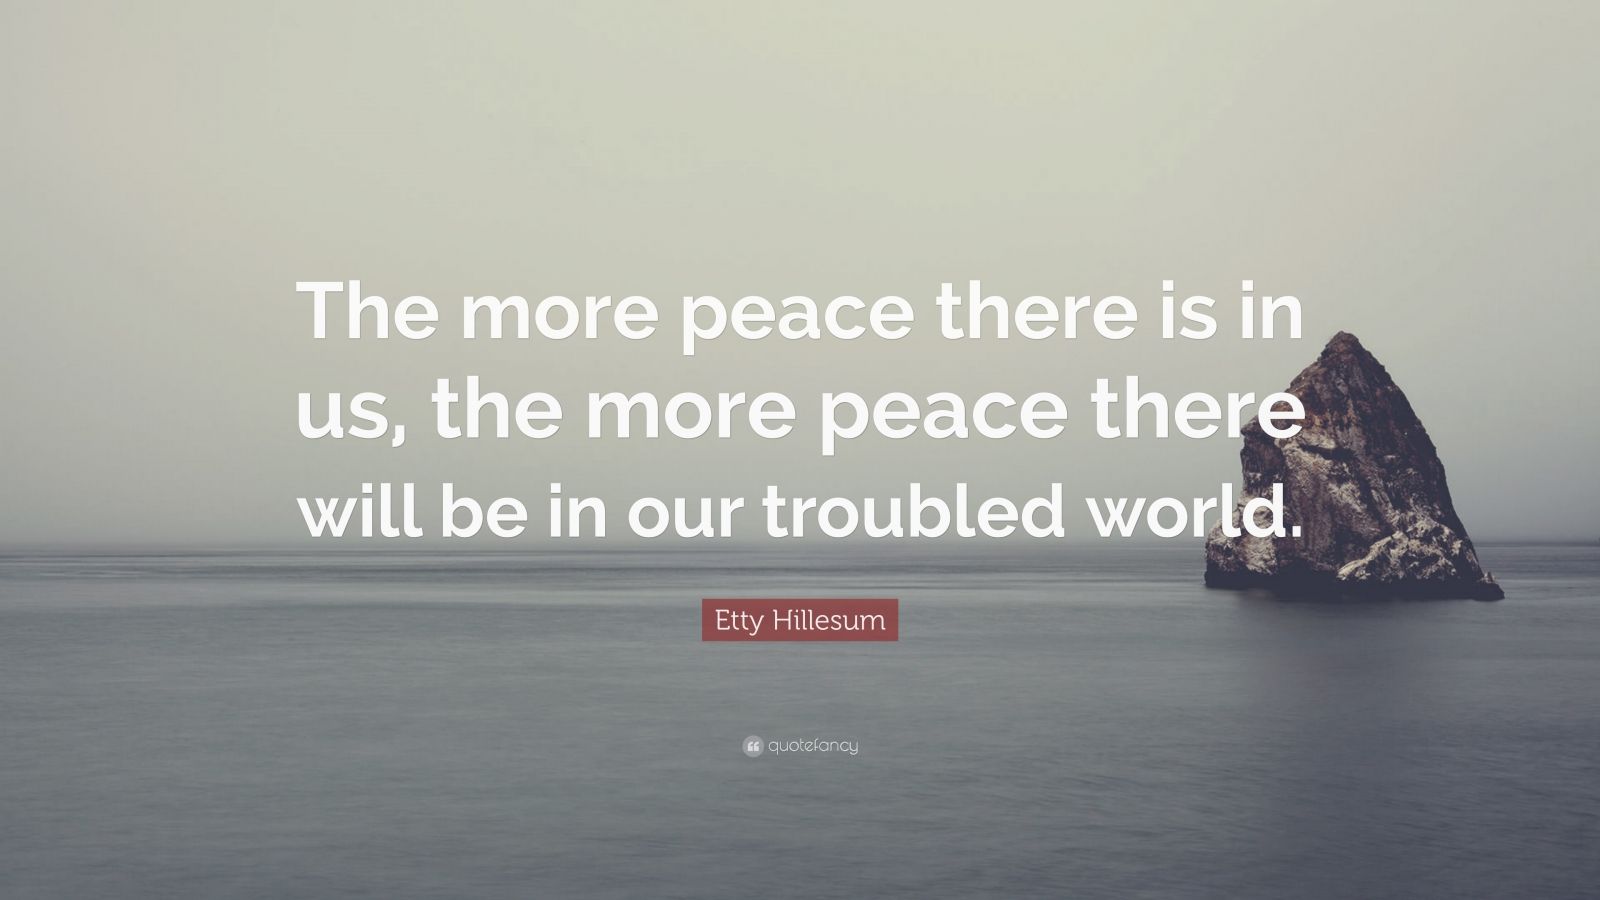 Etty Hillesum Quote: “The more peace there is in us, the more peace ...